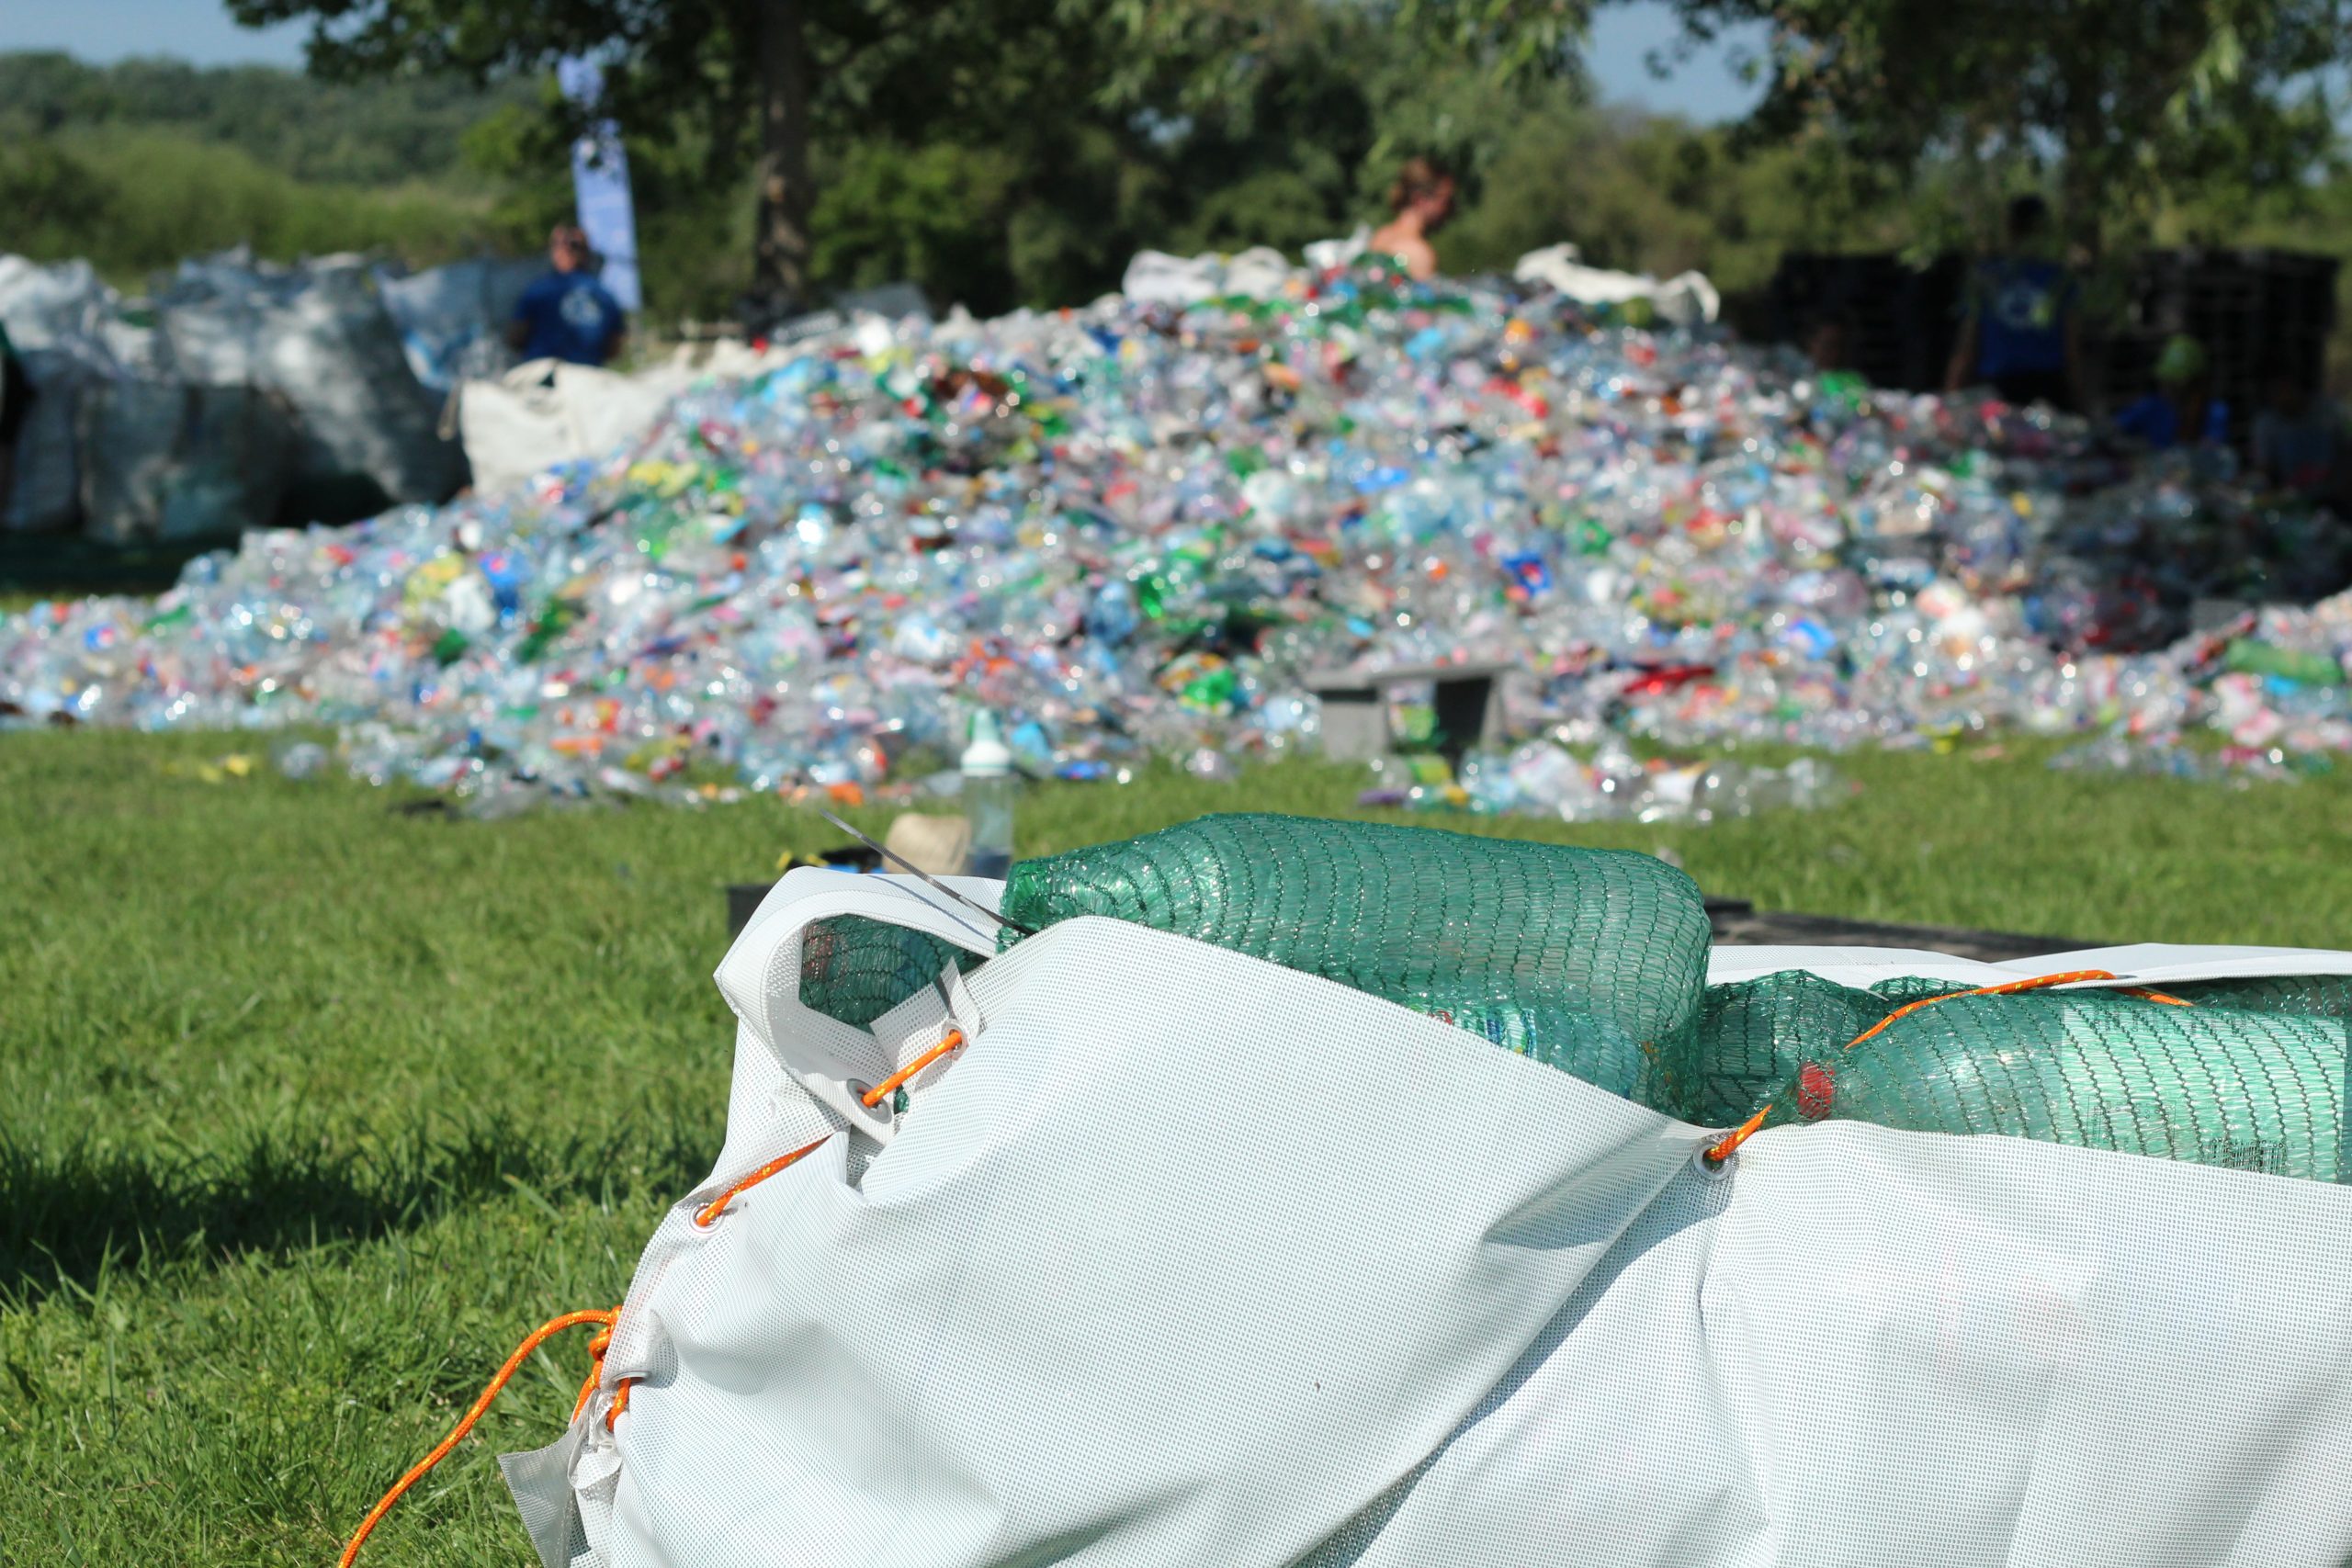 THE TID(Y)UP PROJECT: 3 DAYS ON WATER, 11 TEAMS AND MORE THAN 5 TONS OF WASTE